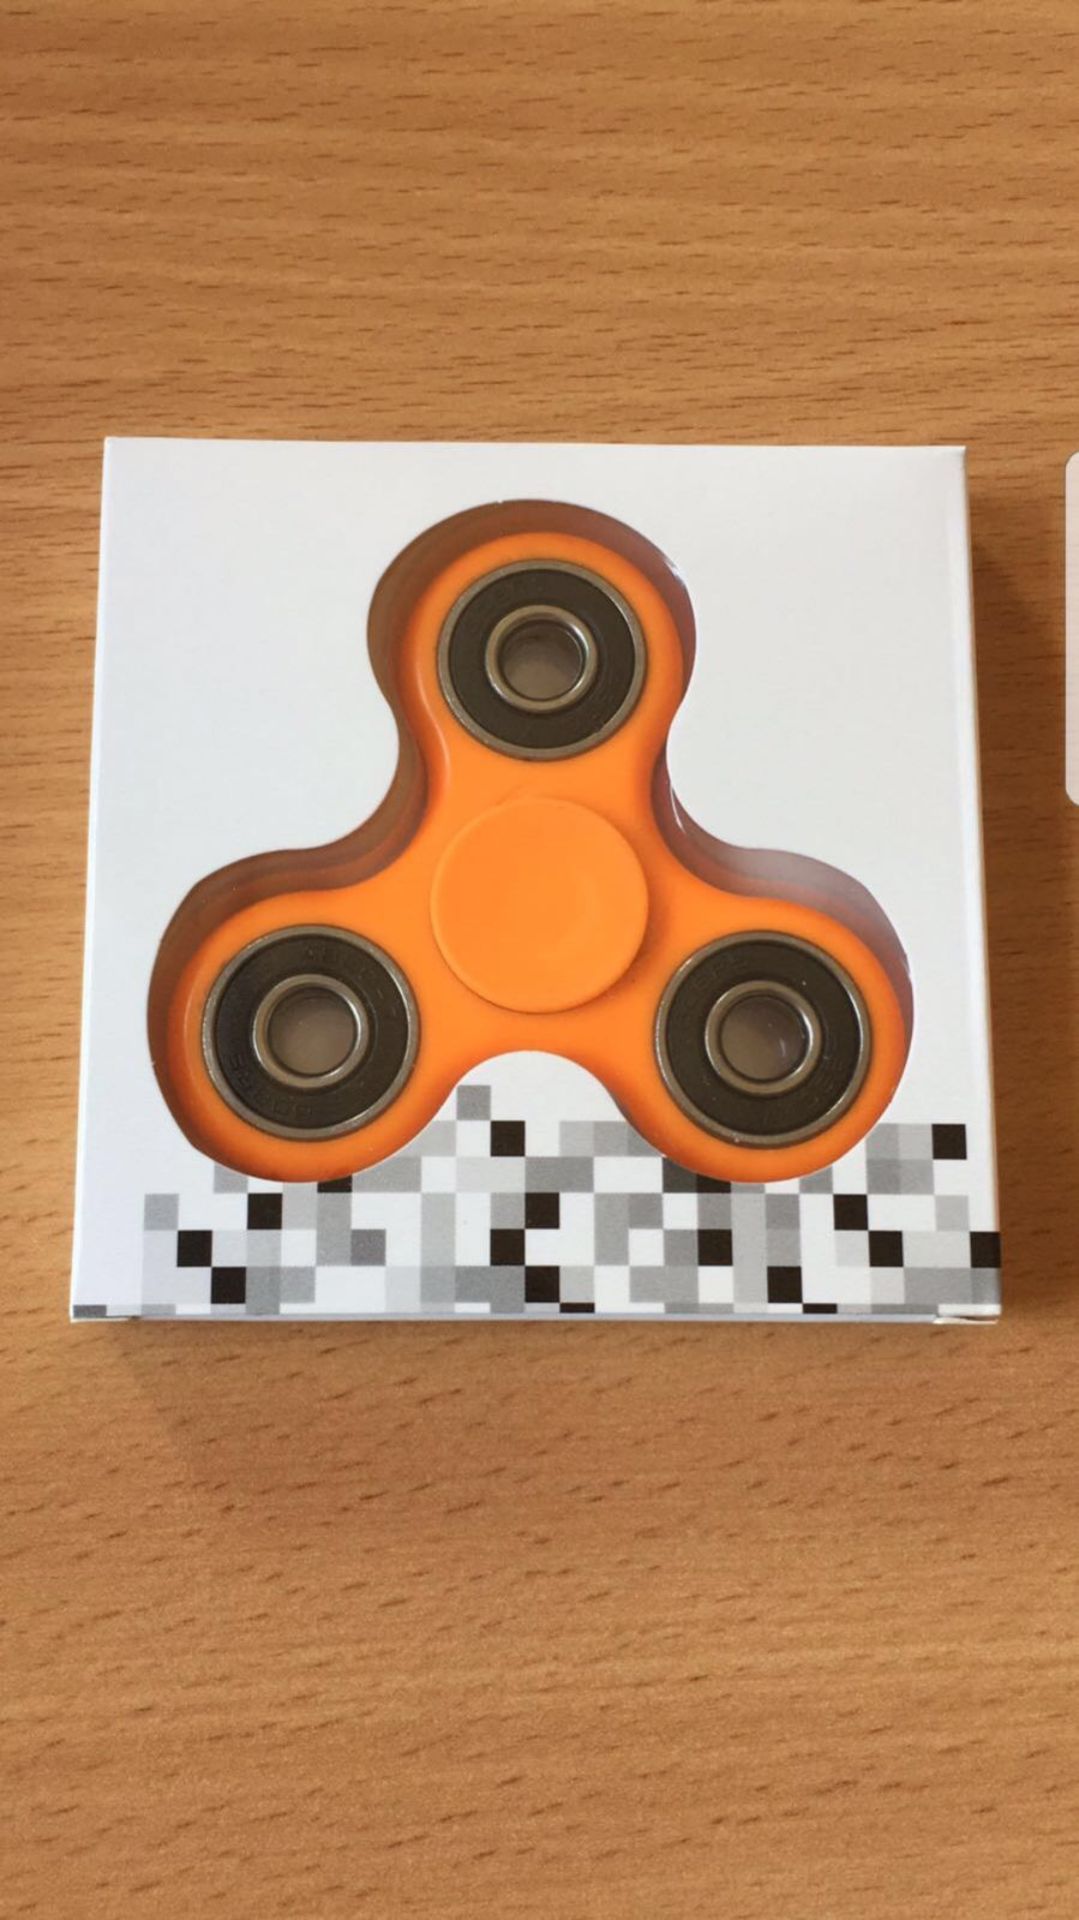 20 x Fidget Spinners. Various Colours Including: Black, Orange, Blue & Yellow. RRP £9.99 each.